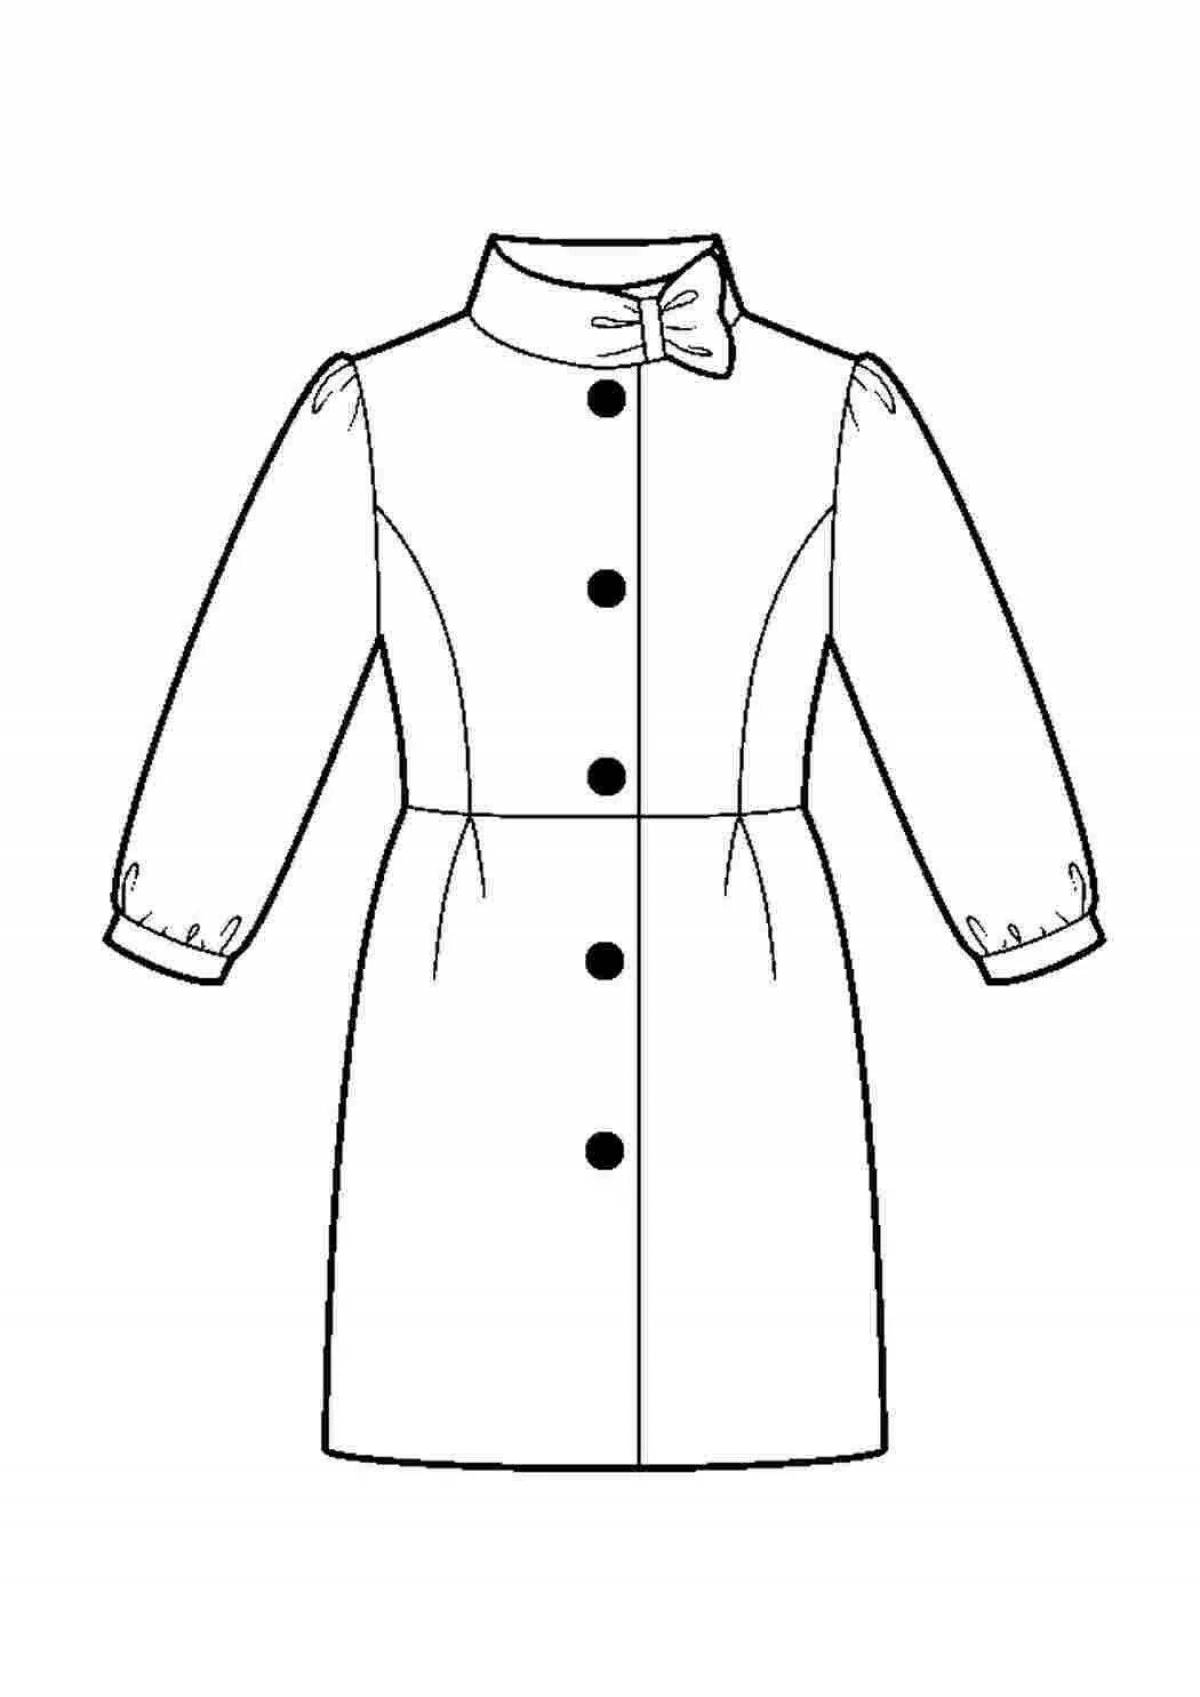 Coloring page fashion coat for kids